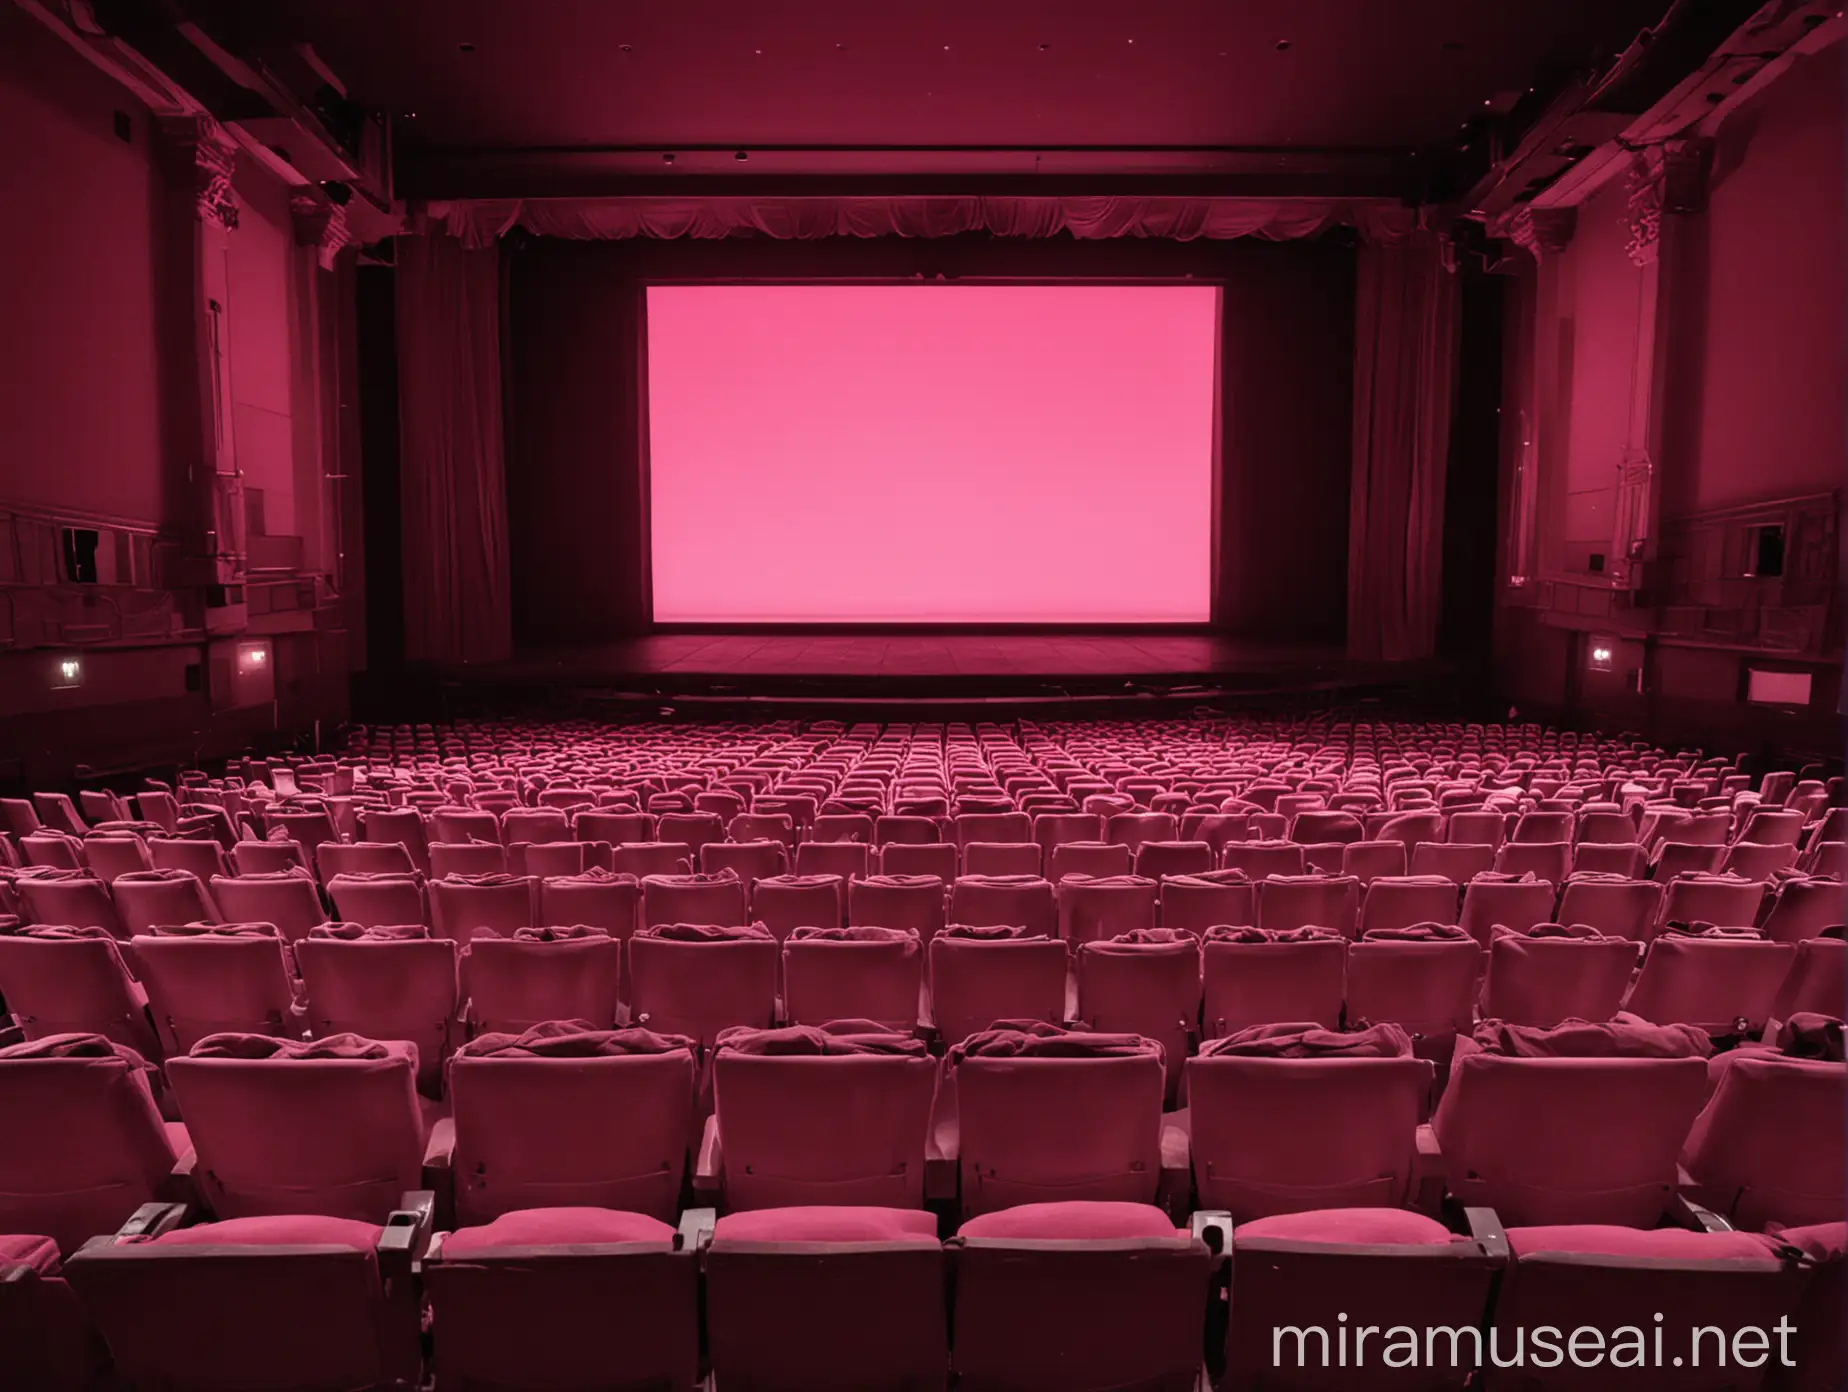 Empty Theatre with Big Center Screen in Pink Lighting